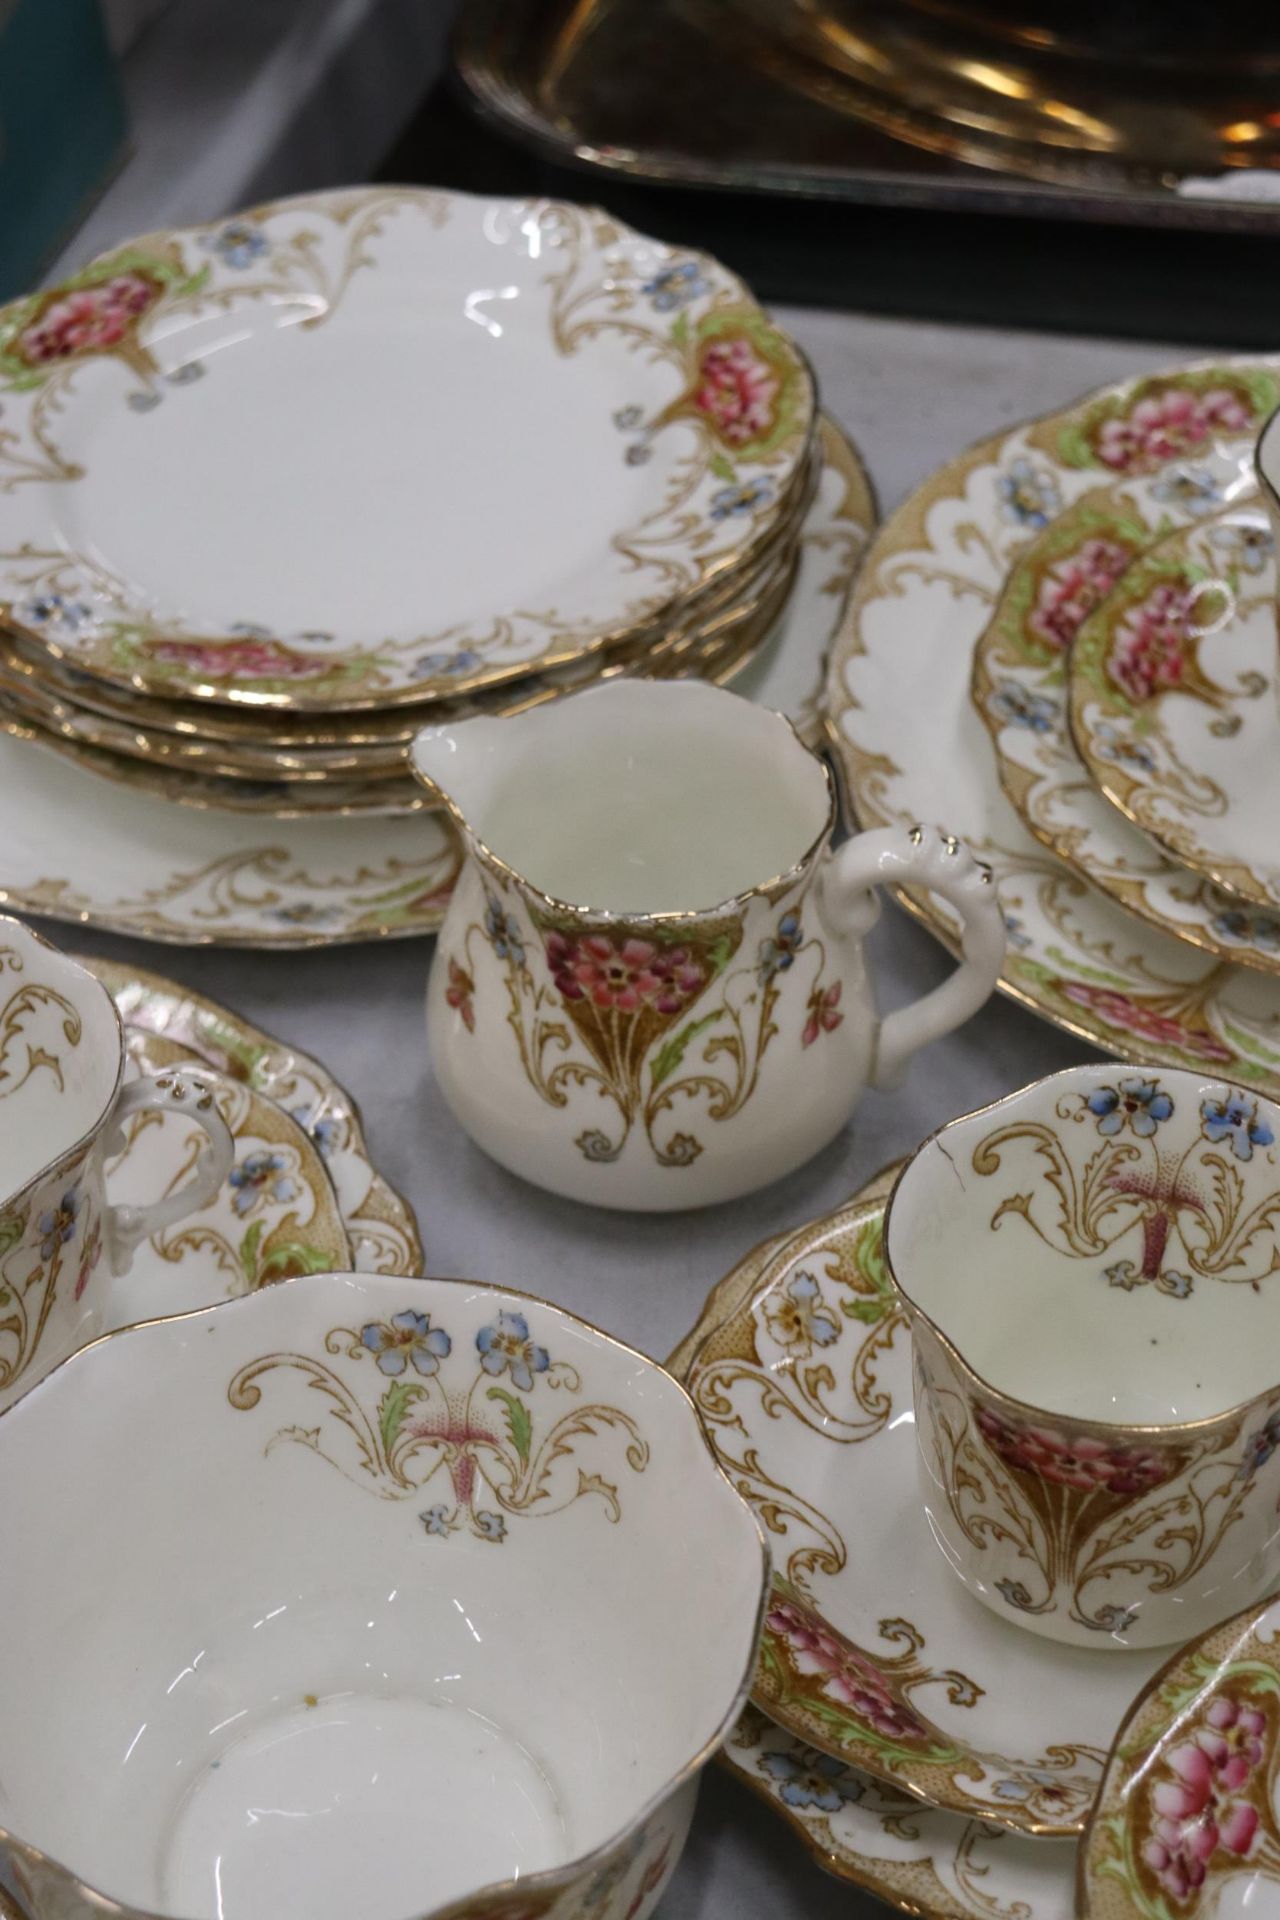 A LATE 18TH/EARLY 19TH CENTURY TEASET BY FRED B PEARCE & CO, LONDON, TO INCLUDE CAKE PLATES, A CREAM - Image 7 of 10